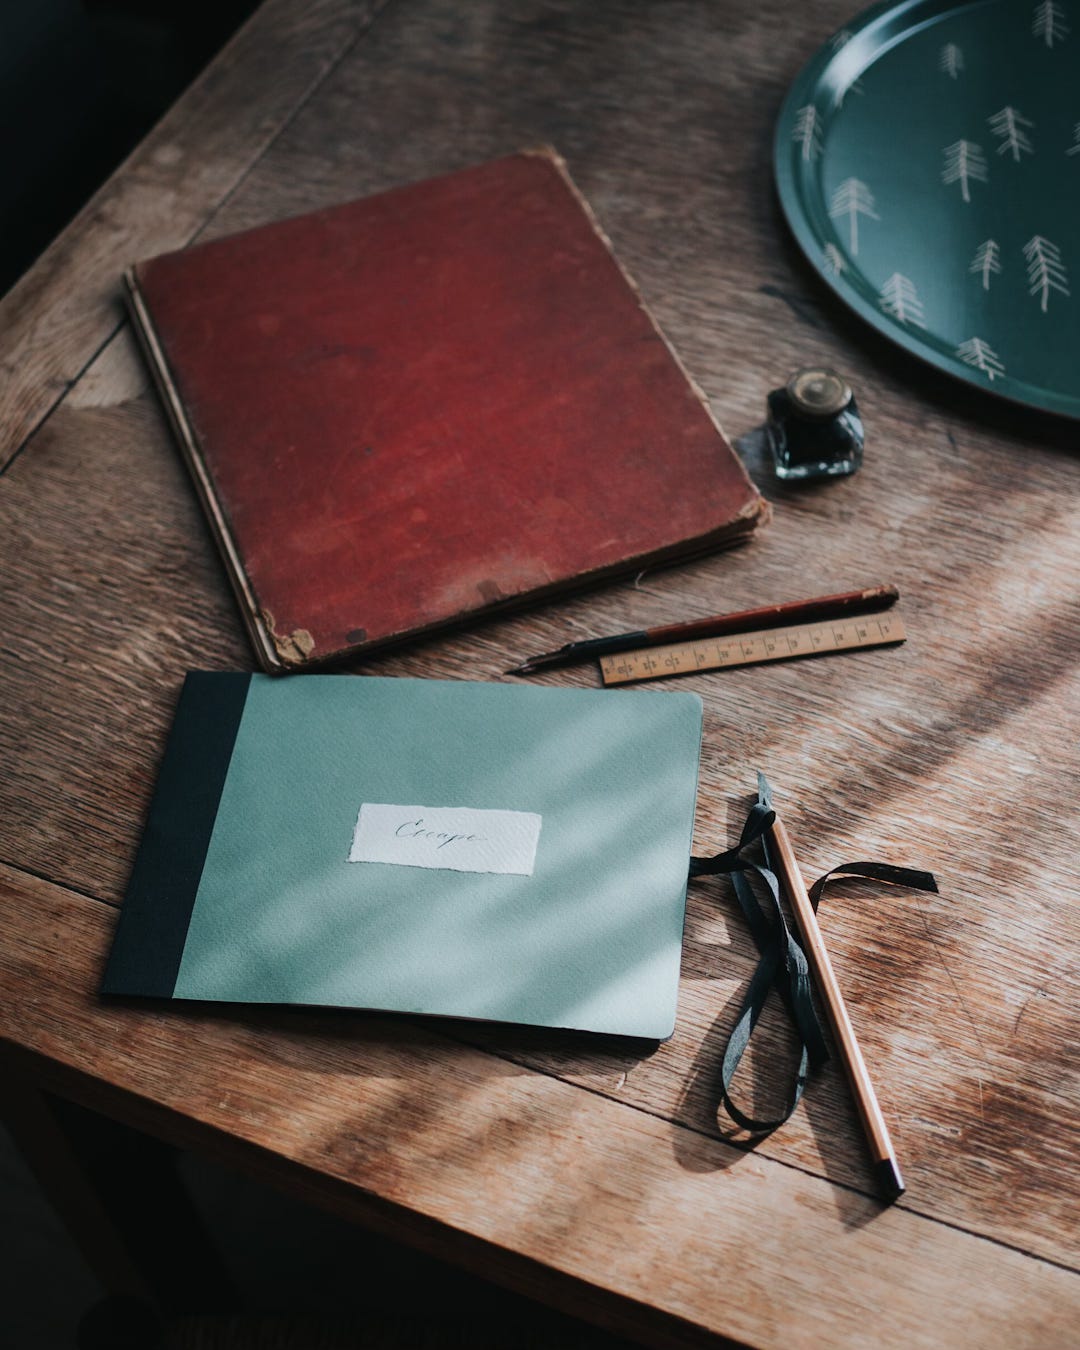 A bound map with a green cover and the title ‘escape’ in calligraphy, pens, and ink bottle, a green tray and a dark red book on a wooden table